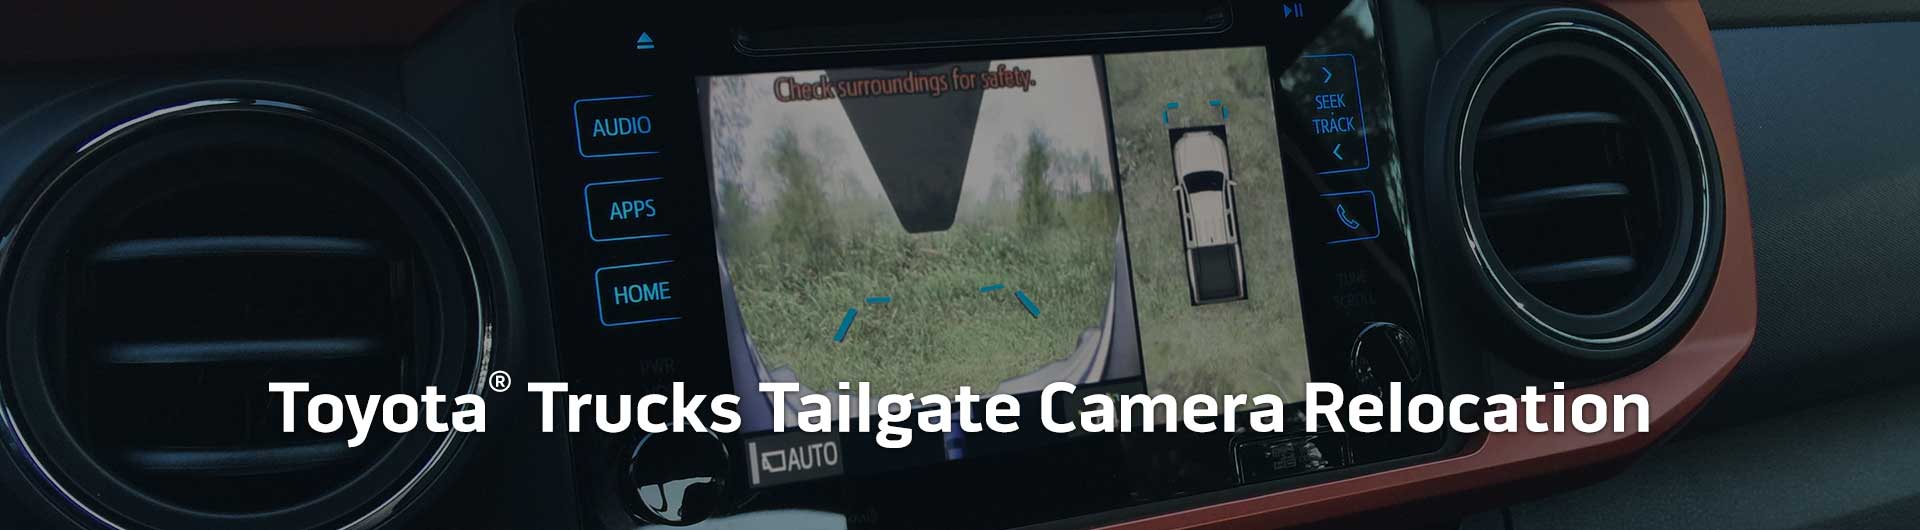 An image showing the in-dash monitor of a Toyota truck. The in-dash monitor shows that the truck is in reverse and is displaying both the backup camera and video from the cameras on the front and side of the truck. The image has text that reads Toyota Trucks Tailgate Camera Relocation.